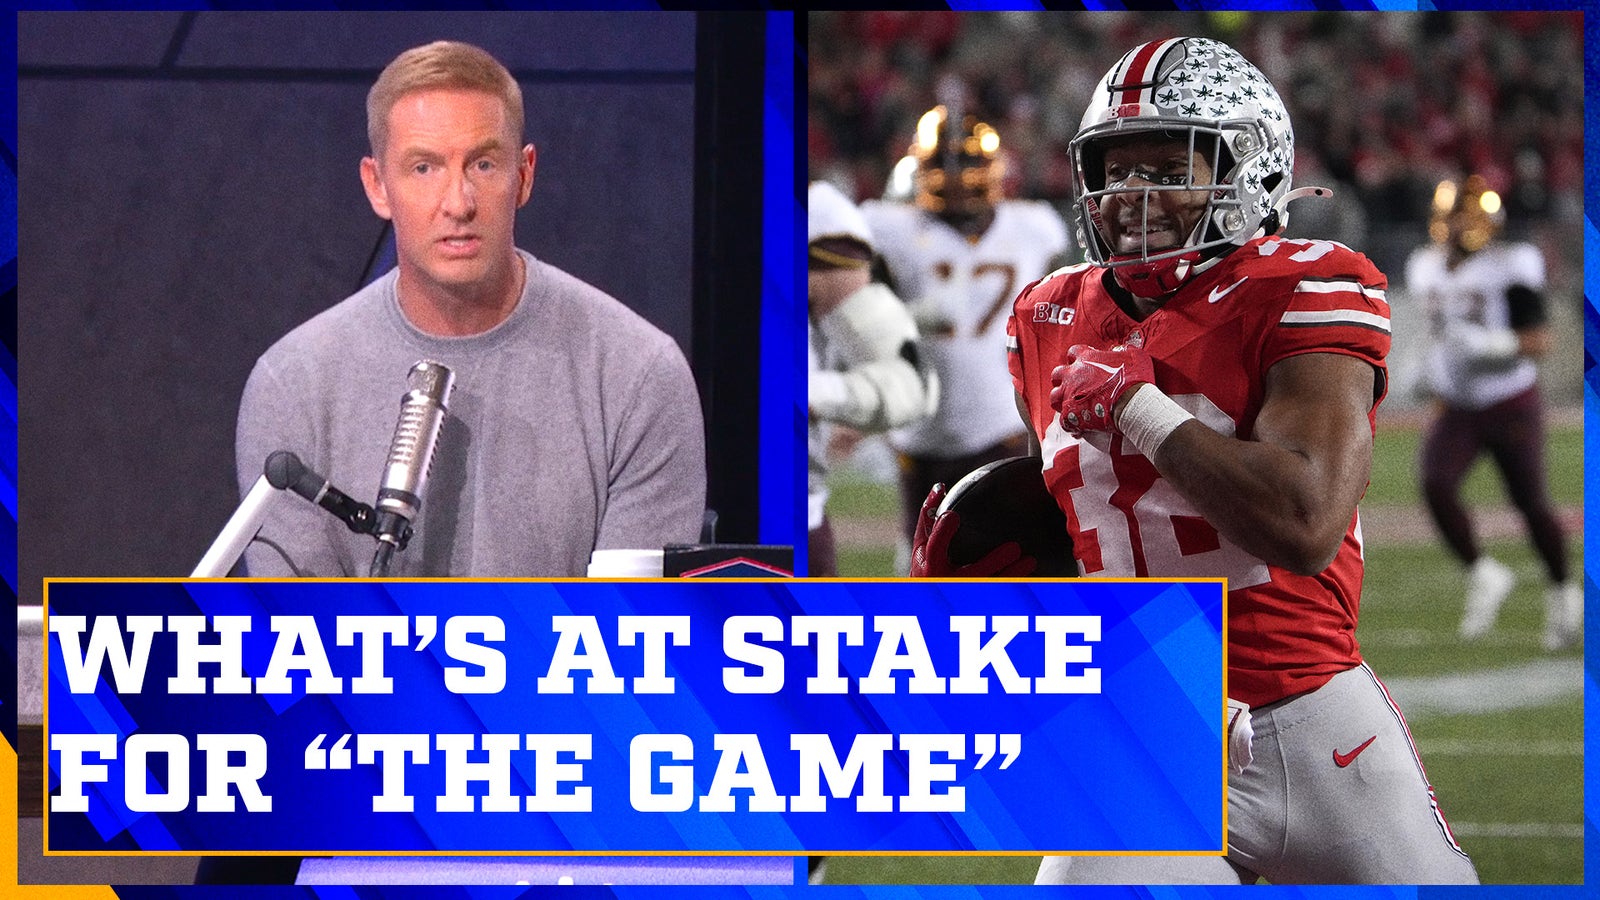 Ohio State vs. Michigan: What is at stake for both teams?